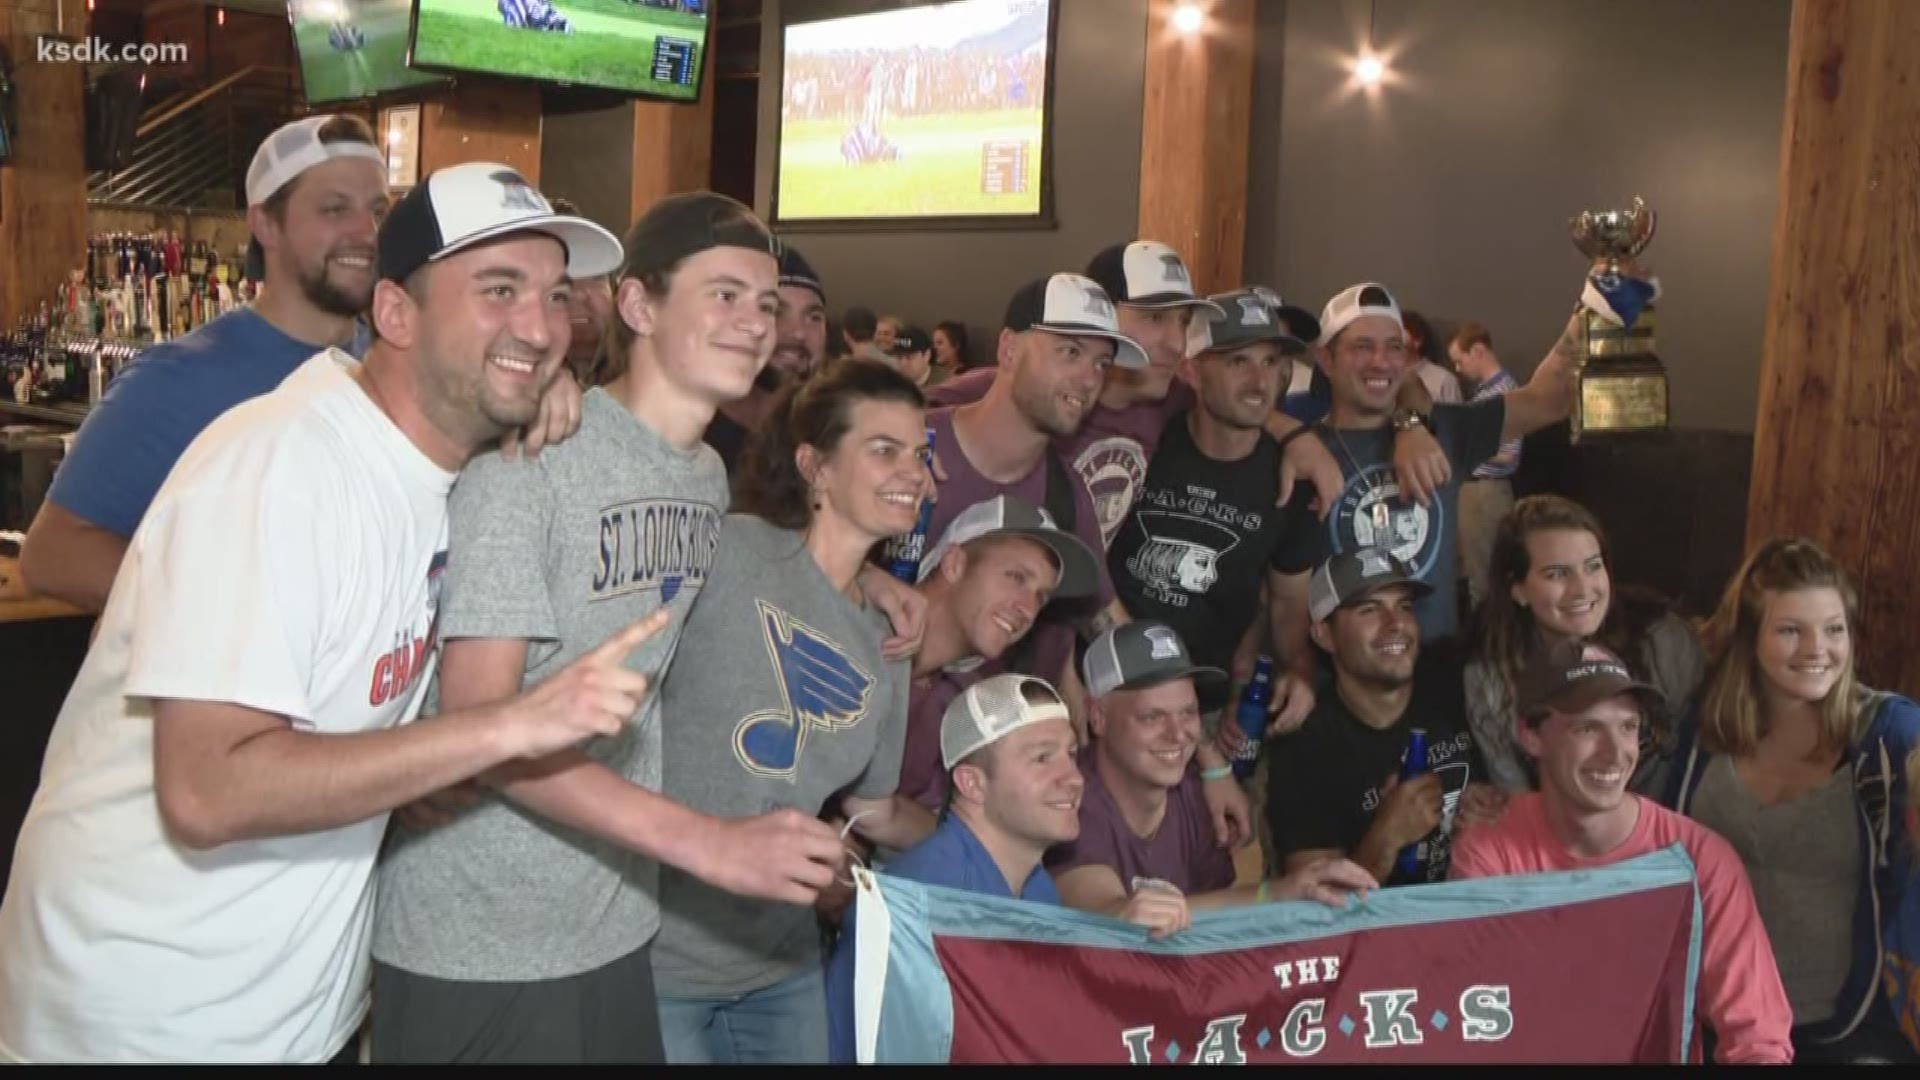 More than 30 people from Philadelphia flew into St. Louis for the Stanley Cup parade on Saturday. They're members of The Jack's NYB Clubhouse -- but to our town, it's known as the 'Gloria Bar.'